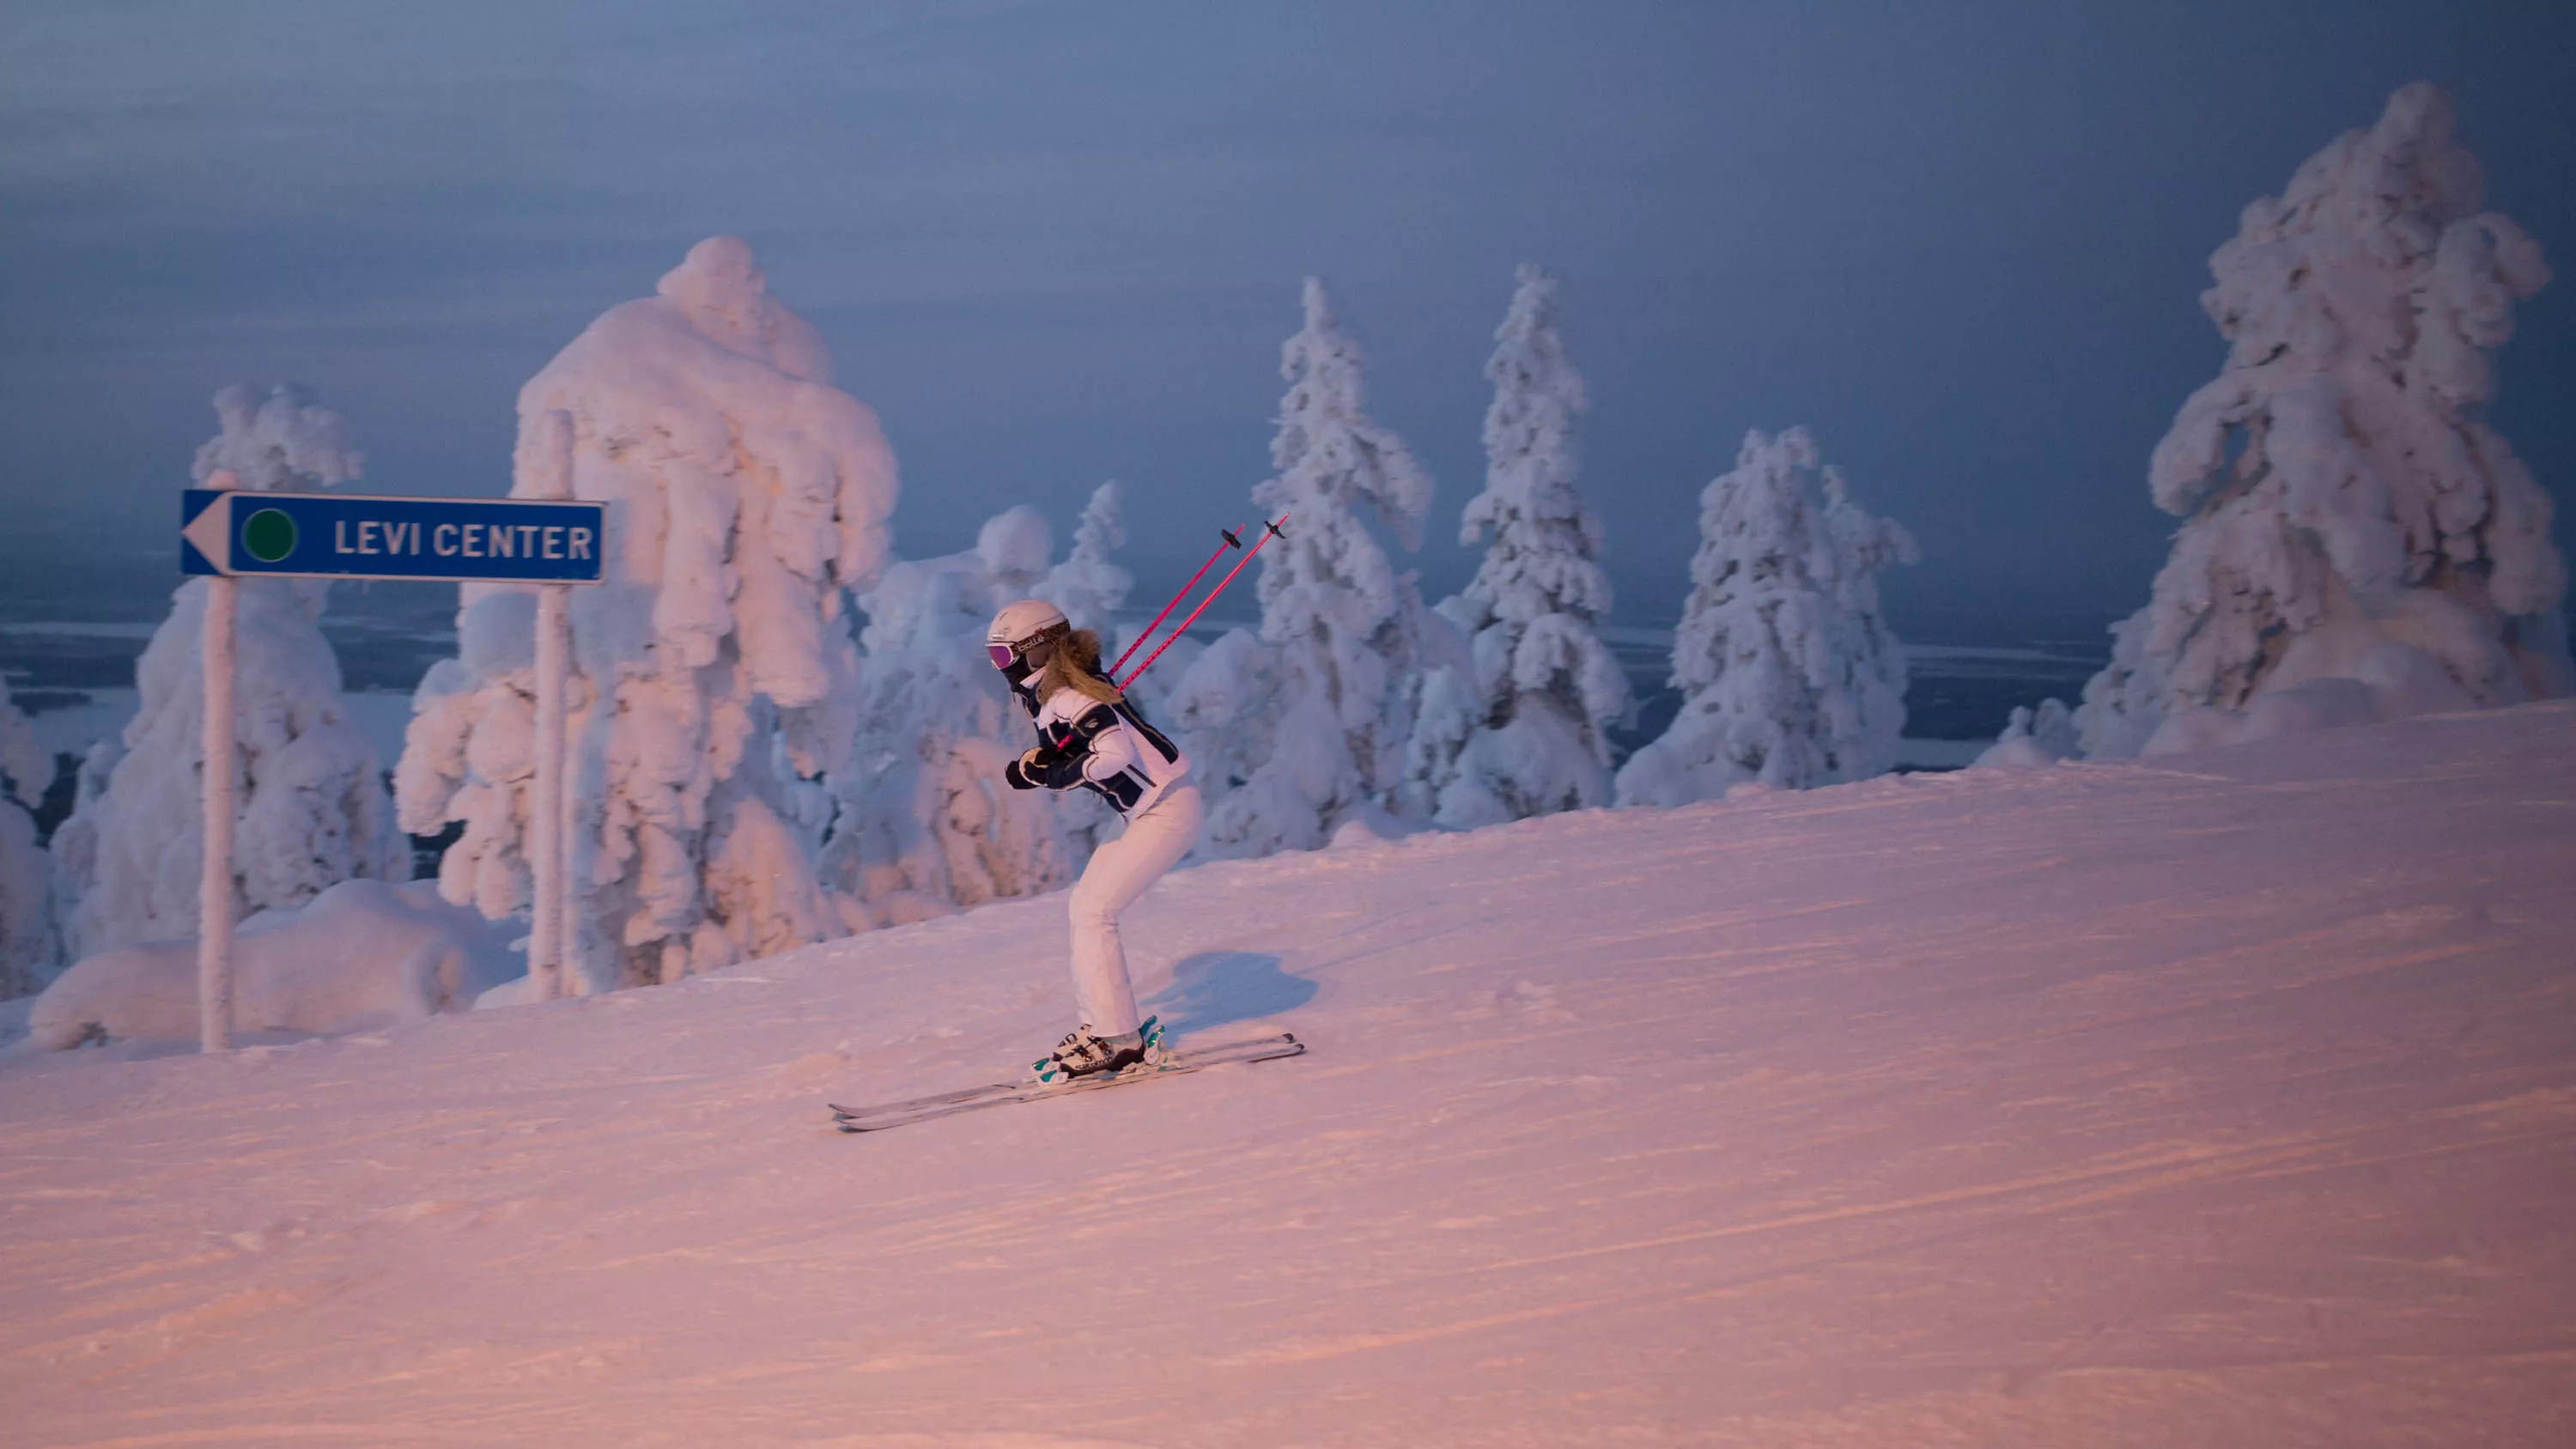 Oy Levi Ski Resort in Finland, Europe | Snowboarding,Skiing,Snowmobiling - Rated 5